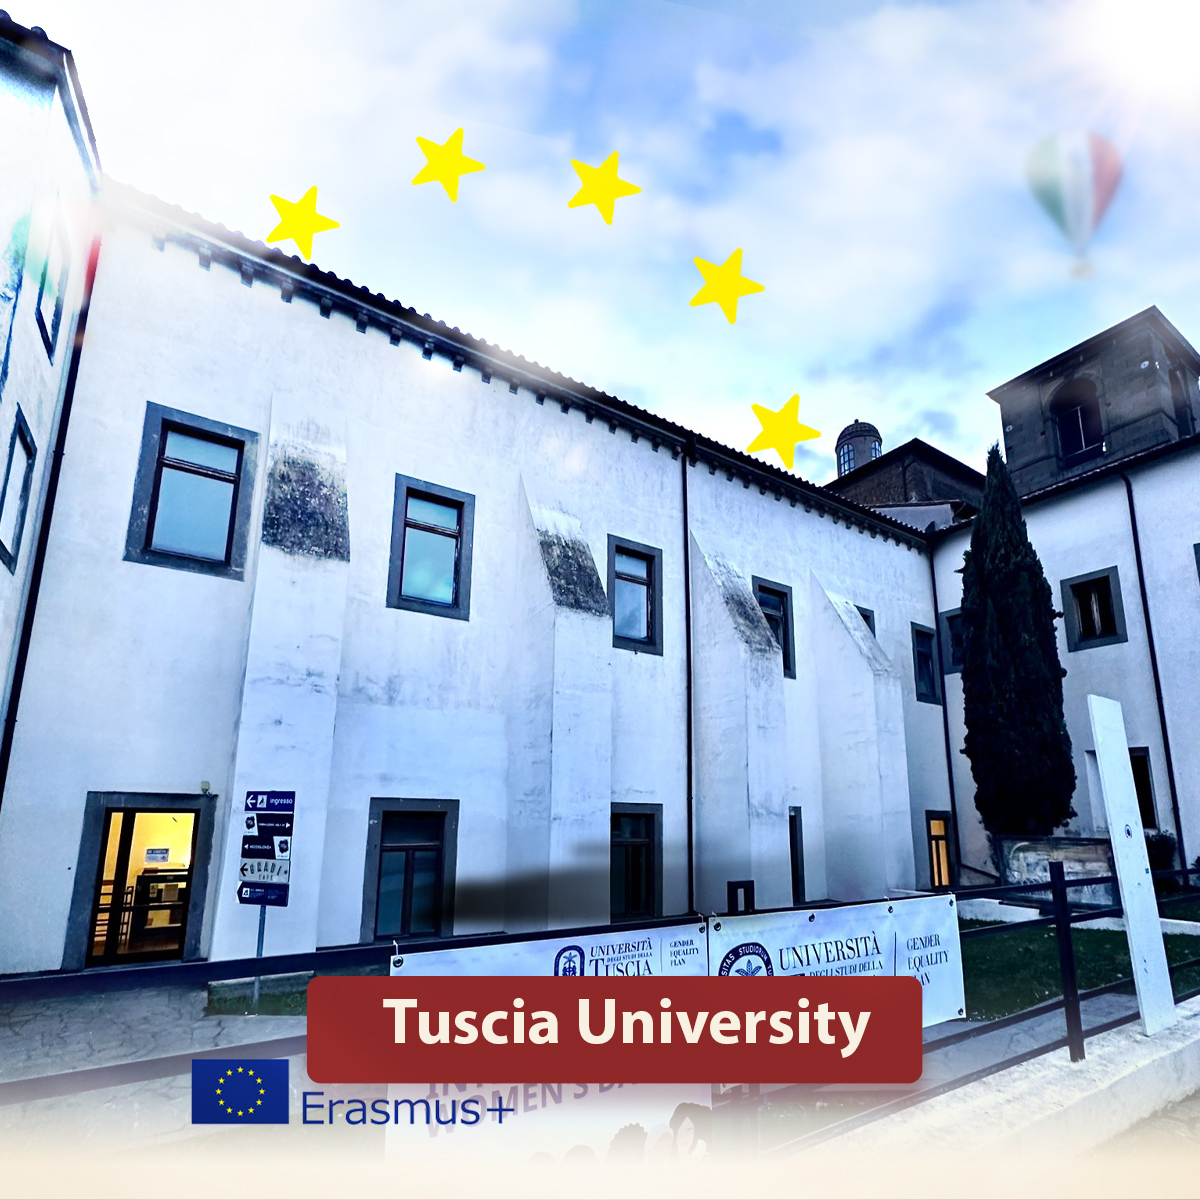 /En/Announcements/PublishingImages/Erasmus+%20Scholarships%20for%20UOP%20Students%20at%20University%20of%20Pavia%20and%20Tuscia%